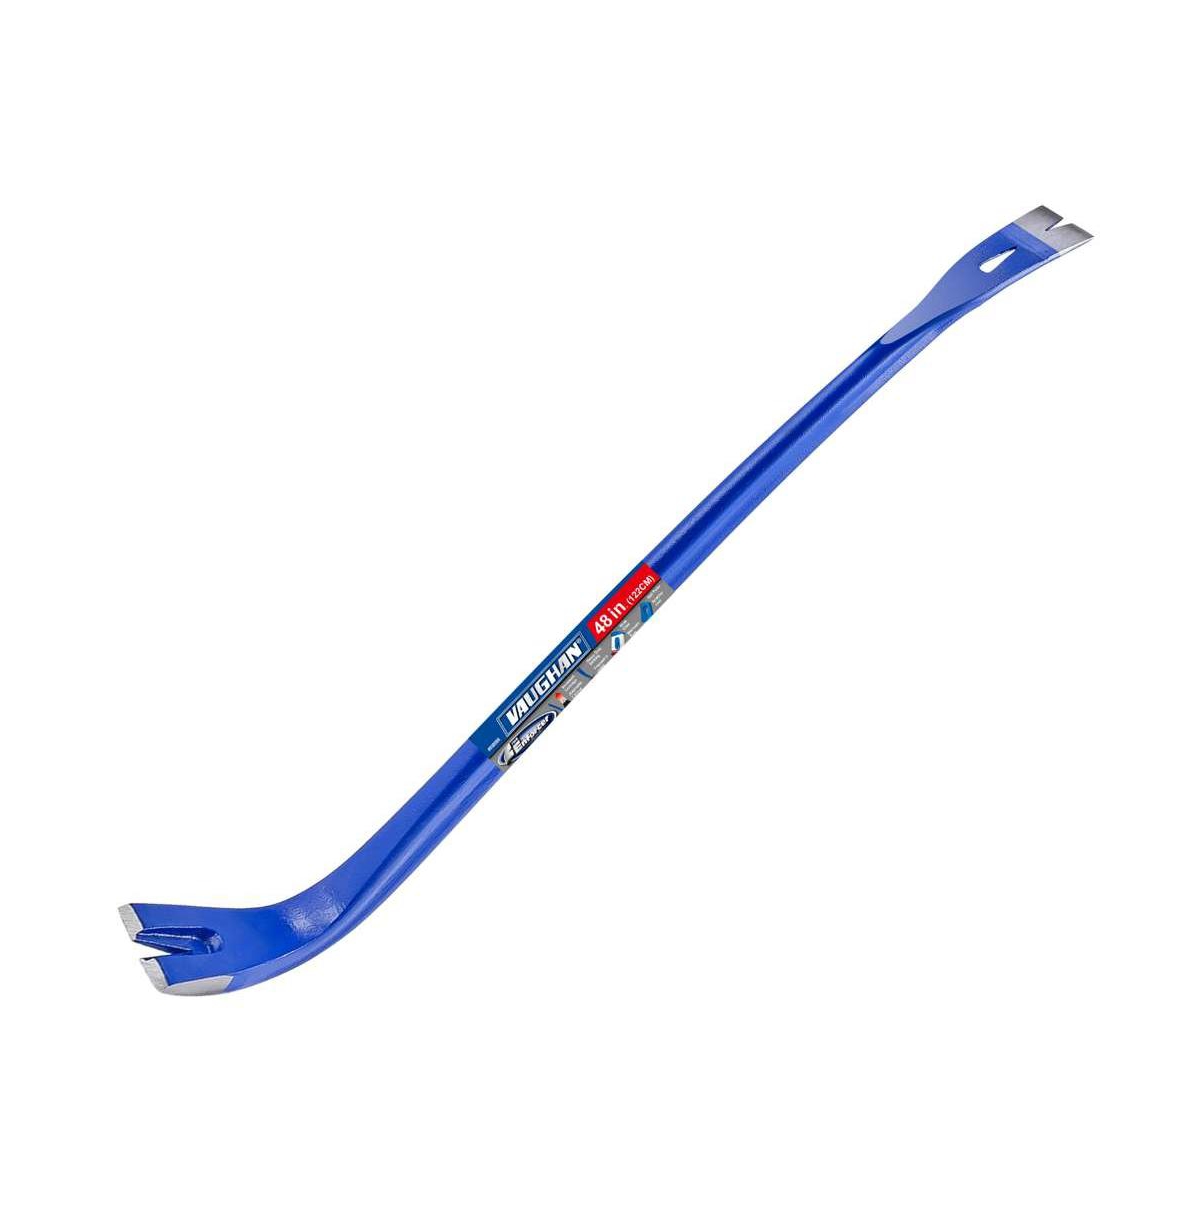 48 Inch Pry Crow Bar with Nail Puller and Curved Handle - Blue